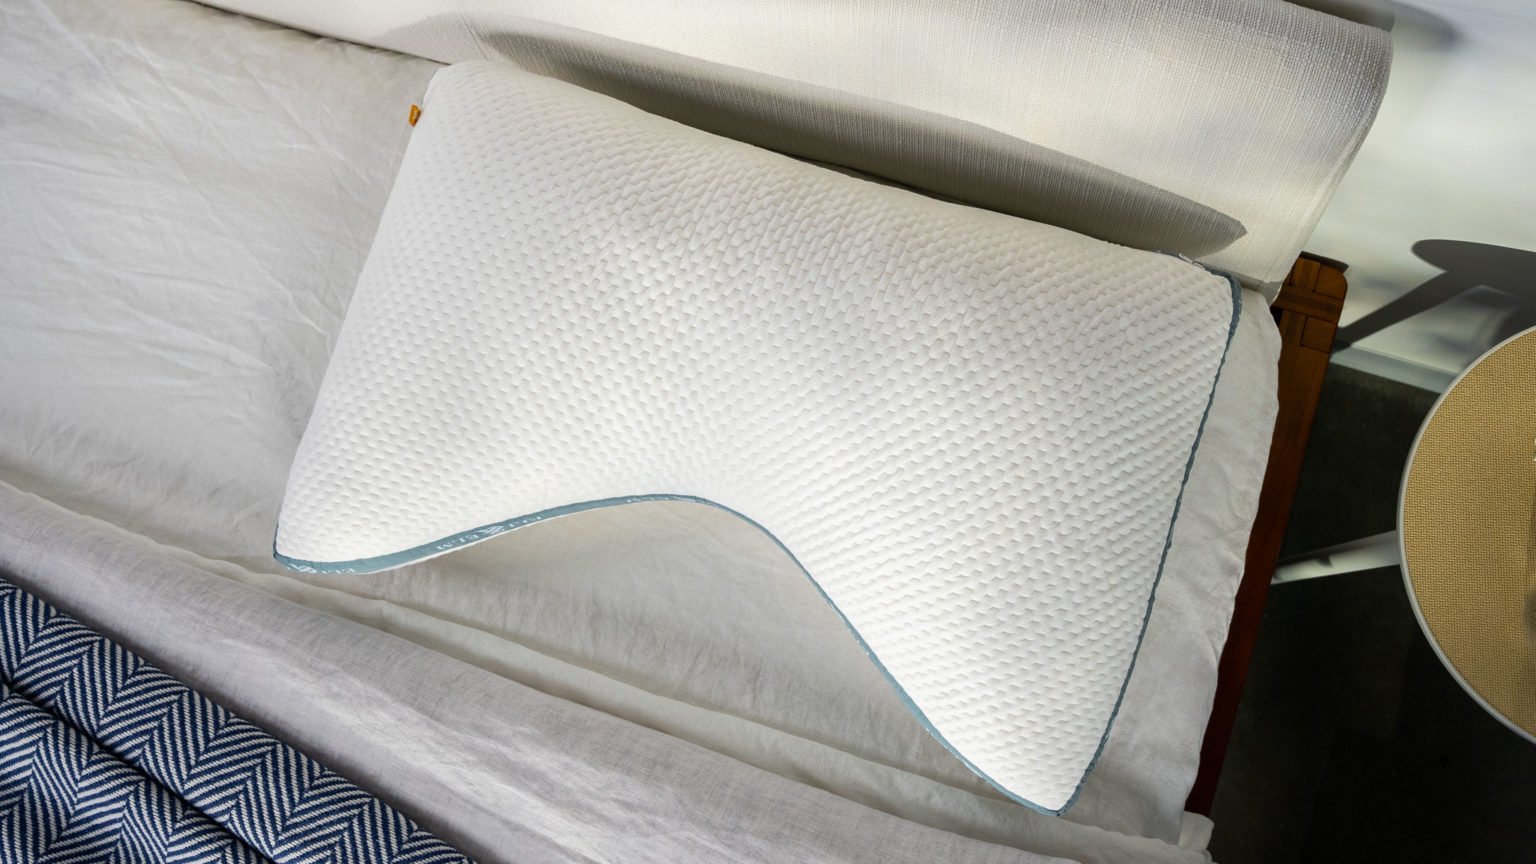 Groove Pillow review: firm support that reduces aches & aligns the spine